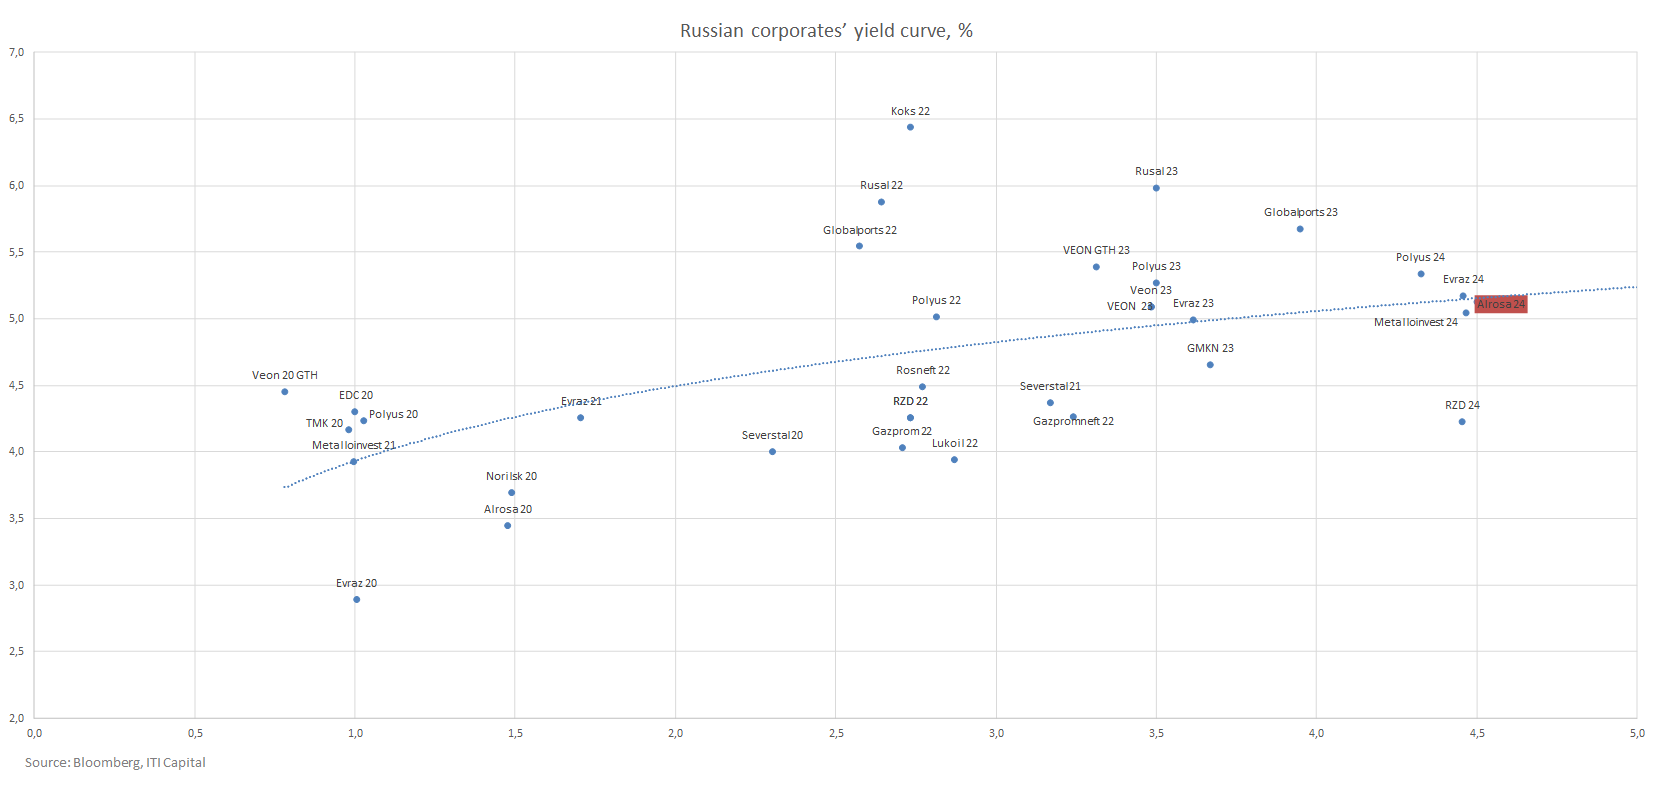 Russian corporates yield curve